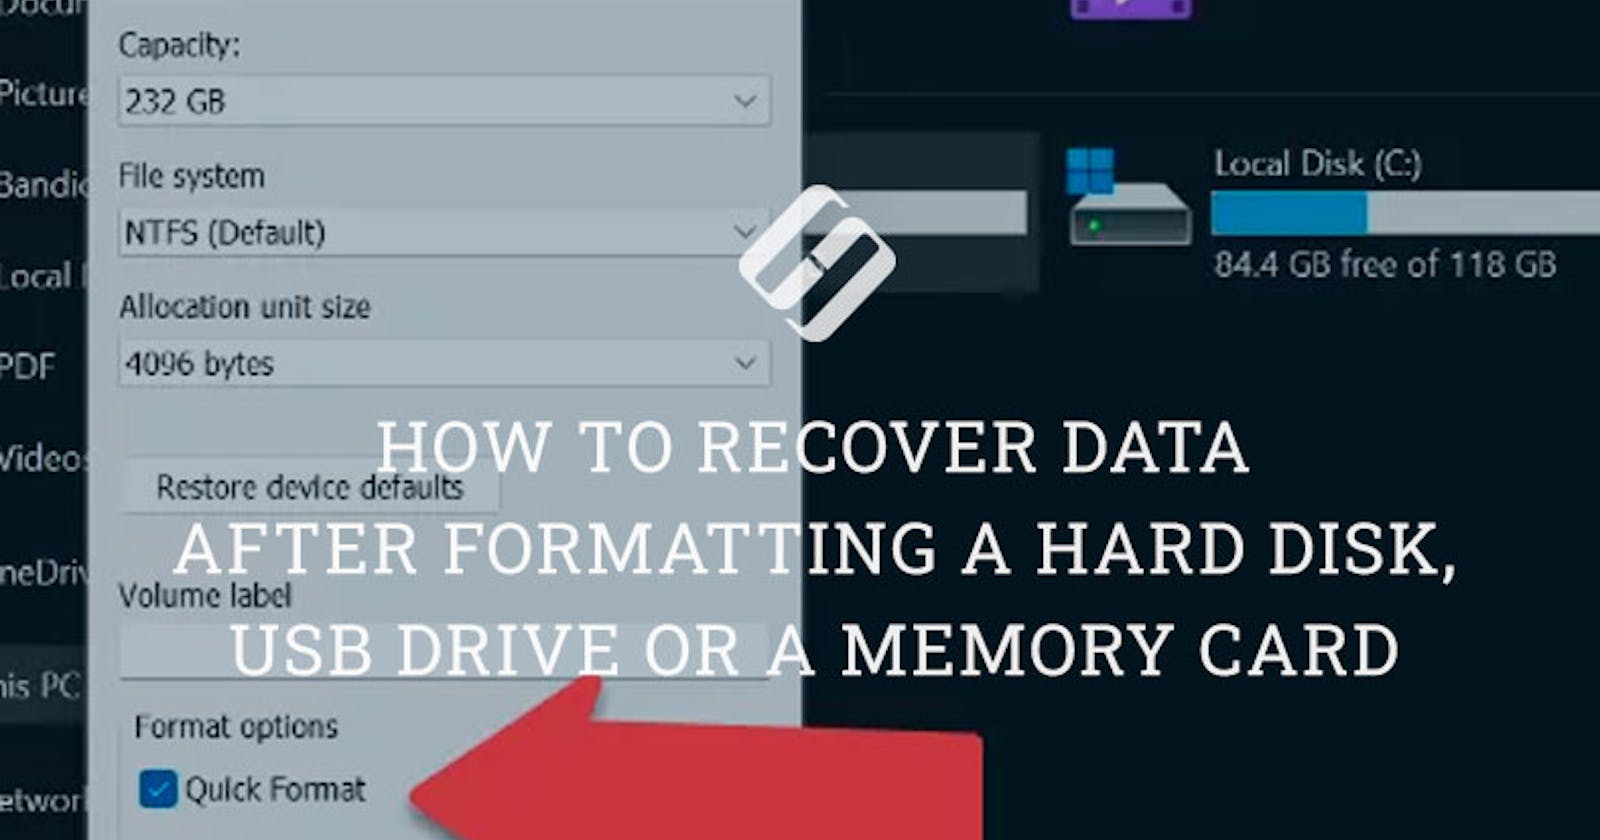 How to Recover Data After Formatting a Hard Disk, USB Drive or a Memory Card